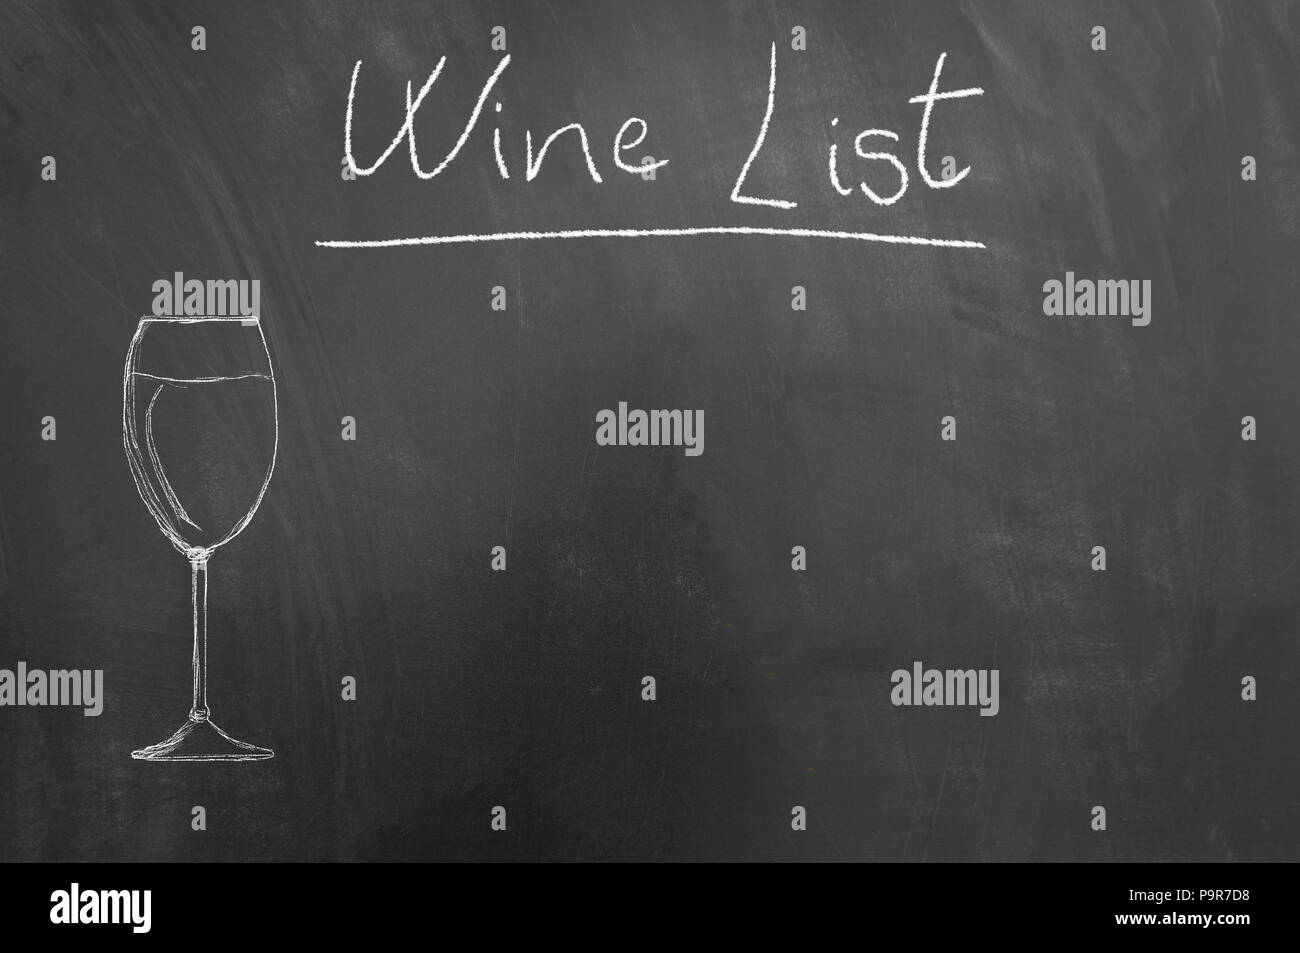 Wine list chalk text glass drawing on blackboard or chalkboard as alcohol drink menu board concept with copy space Stock Photo